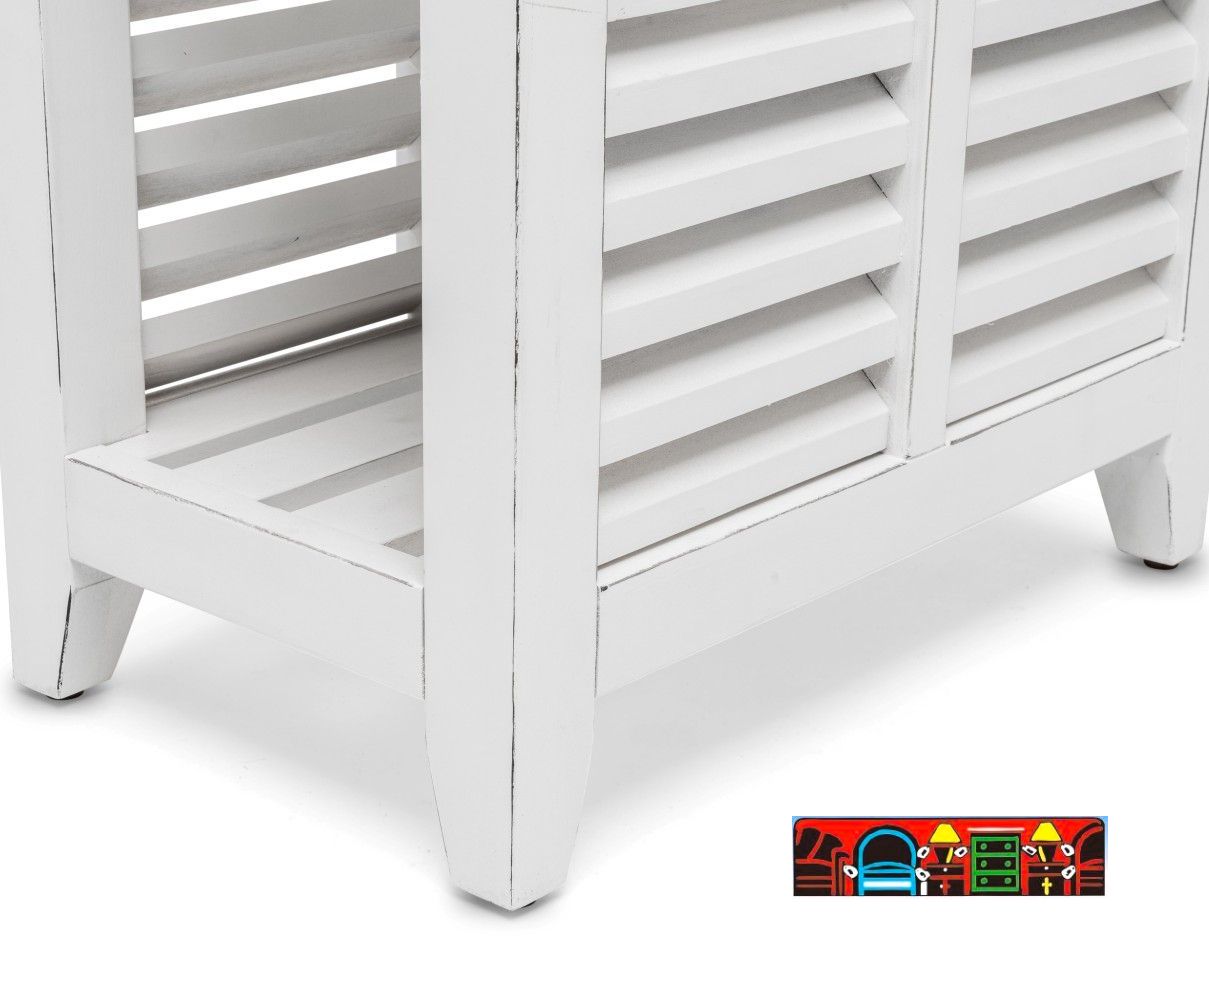 Islamorada Chairside table in white and distressed grey, featuring shutter accents, equipped with a drawer and a bottom shelf. Showcasing the shutter accents.